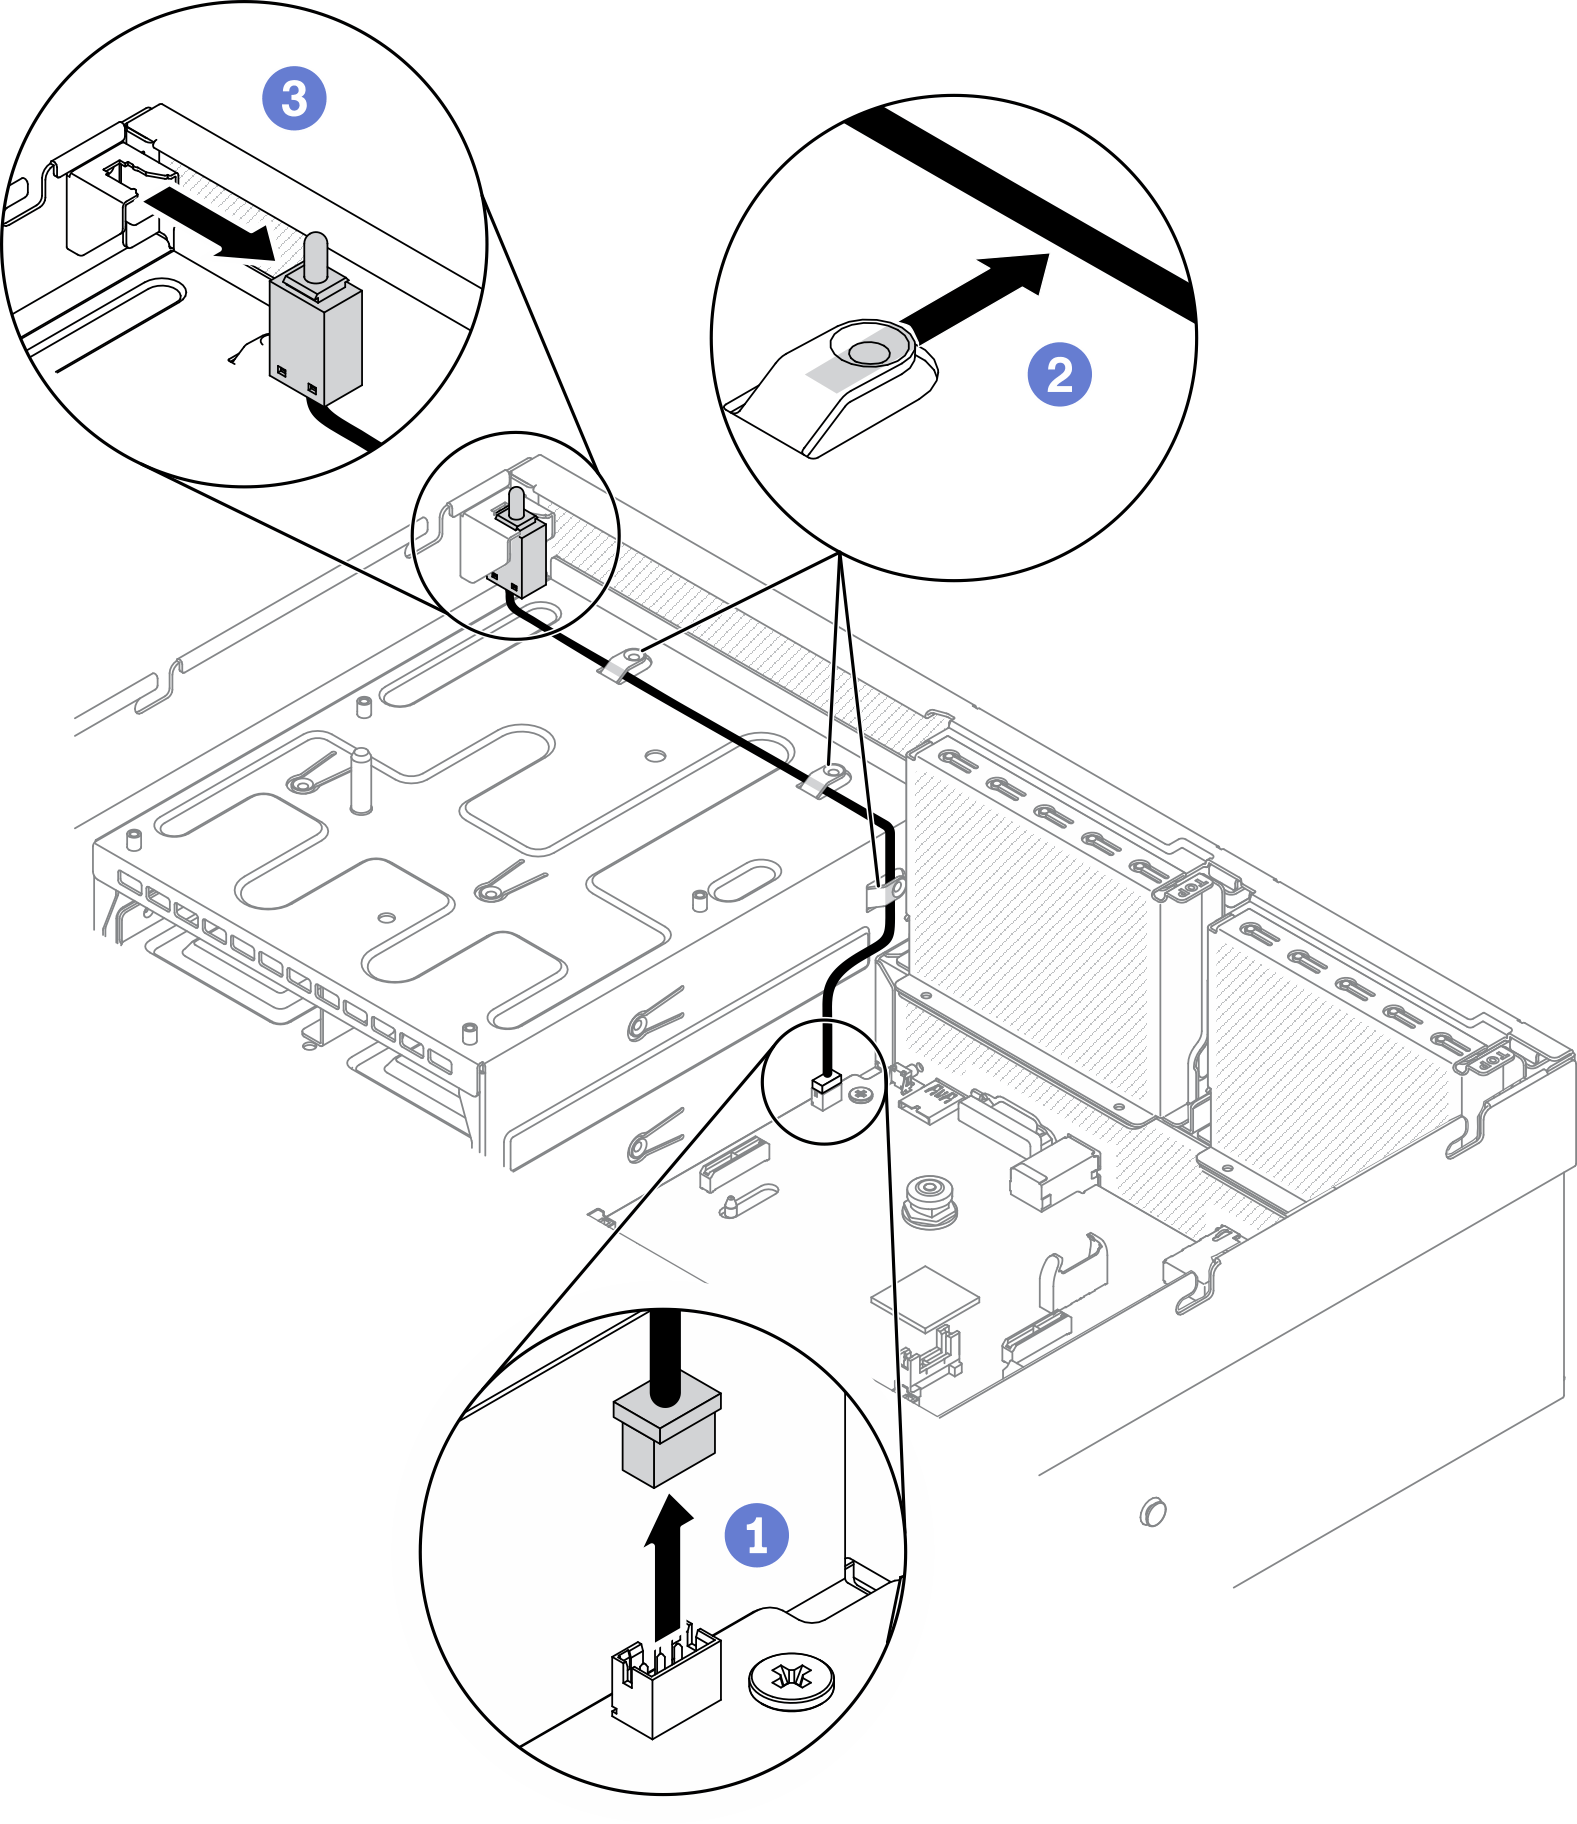 Removing the intrusion switch